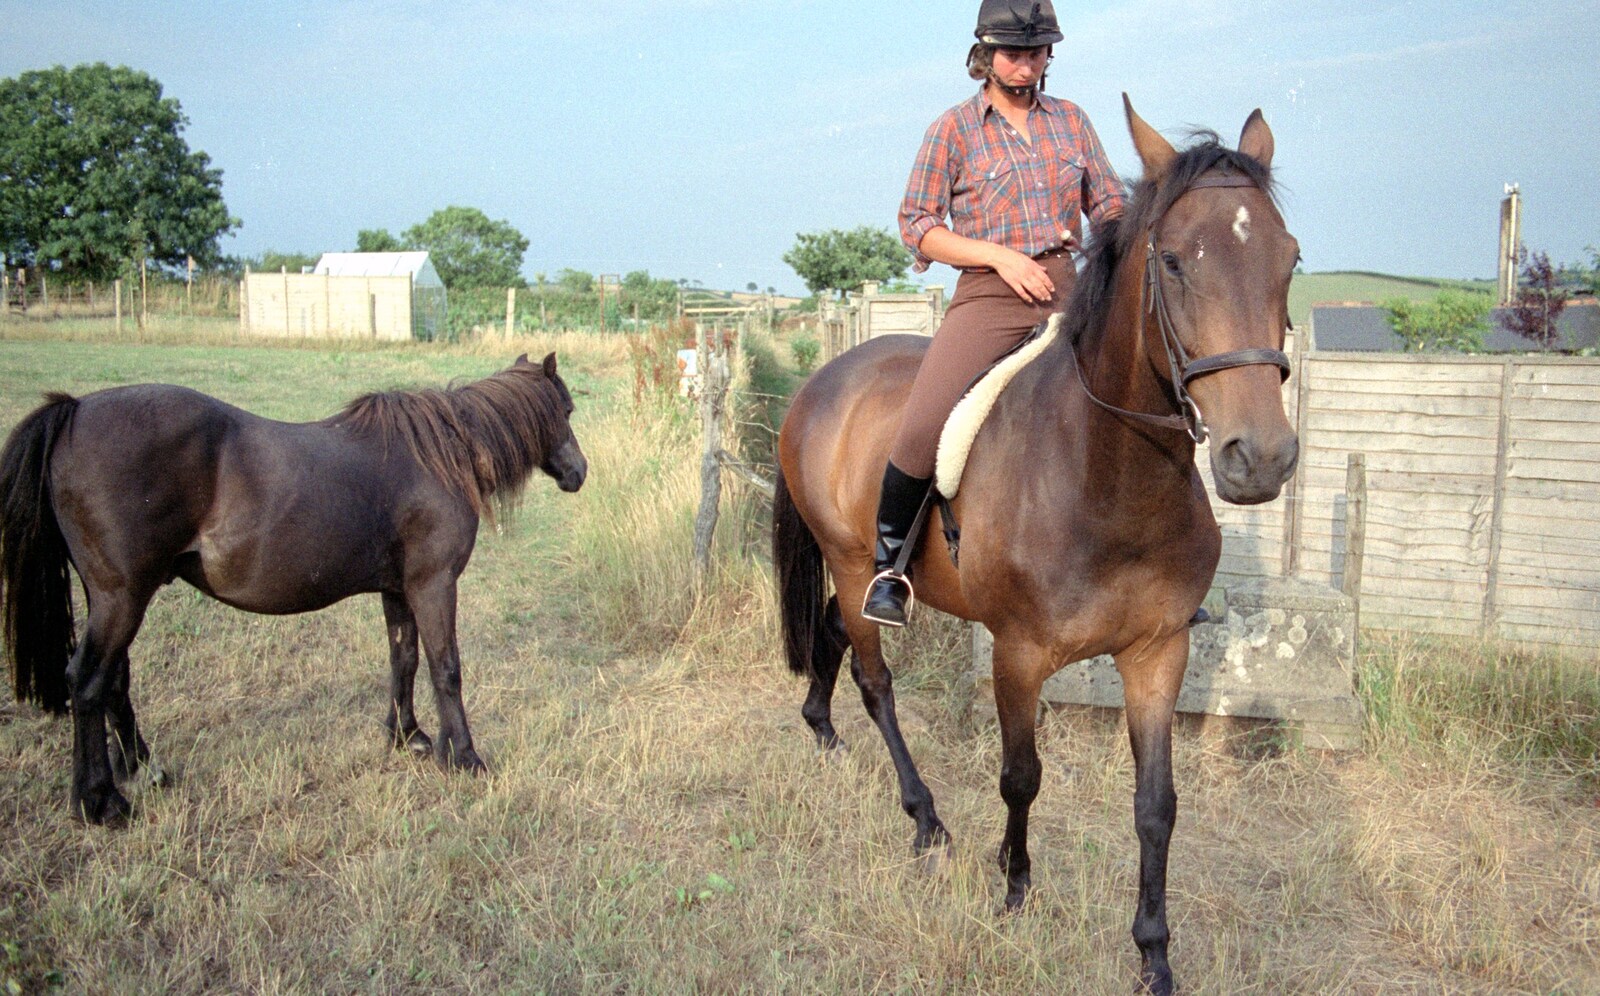 A companion pony and oberon from Summer Days on Pitt Farm, Harbertonford, Devon - 17th July 1989